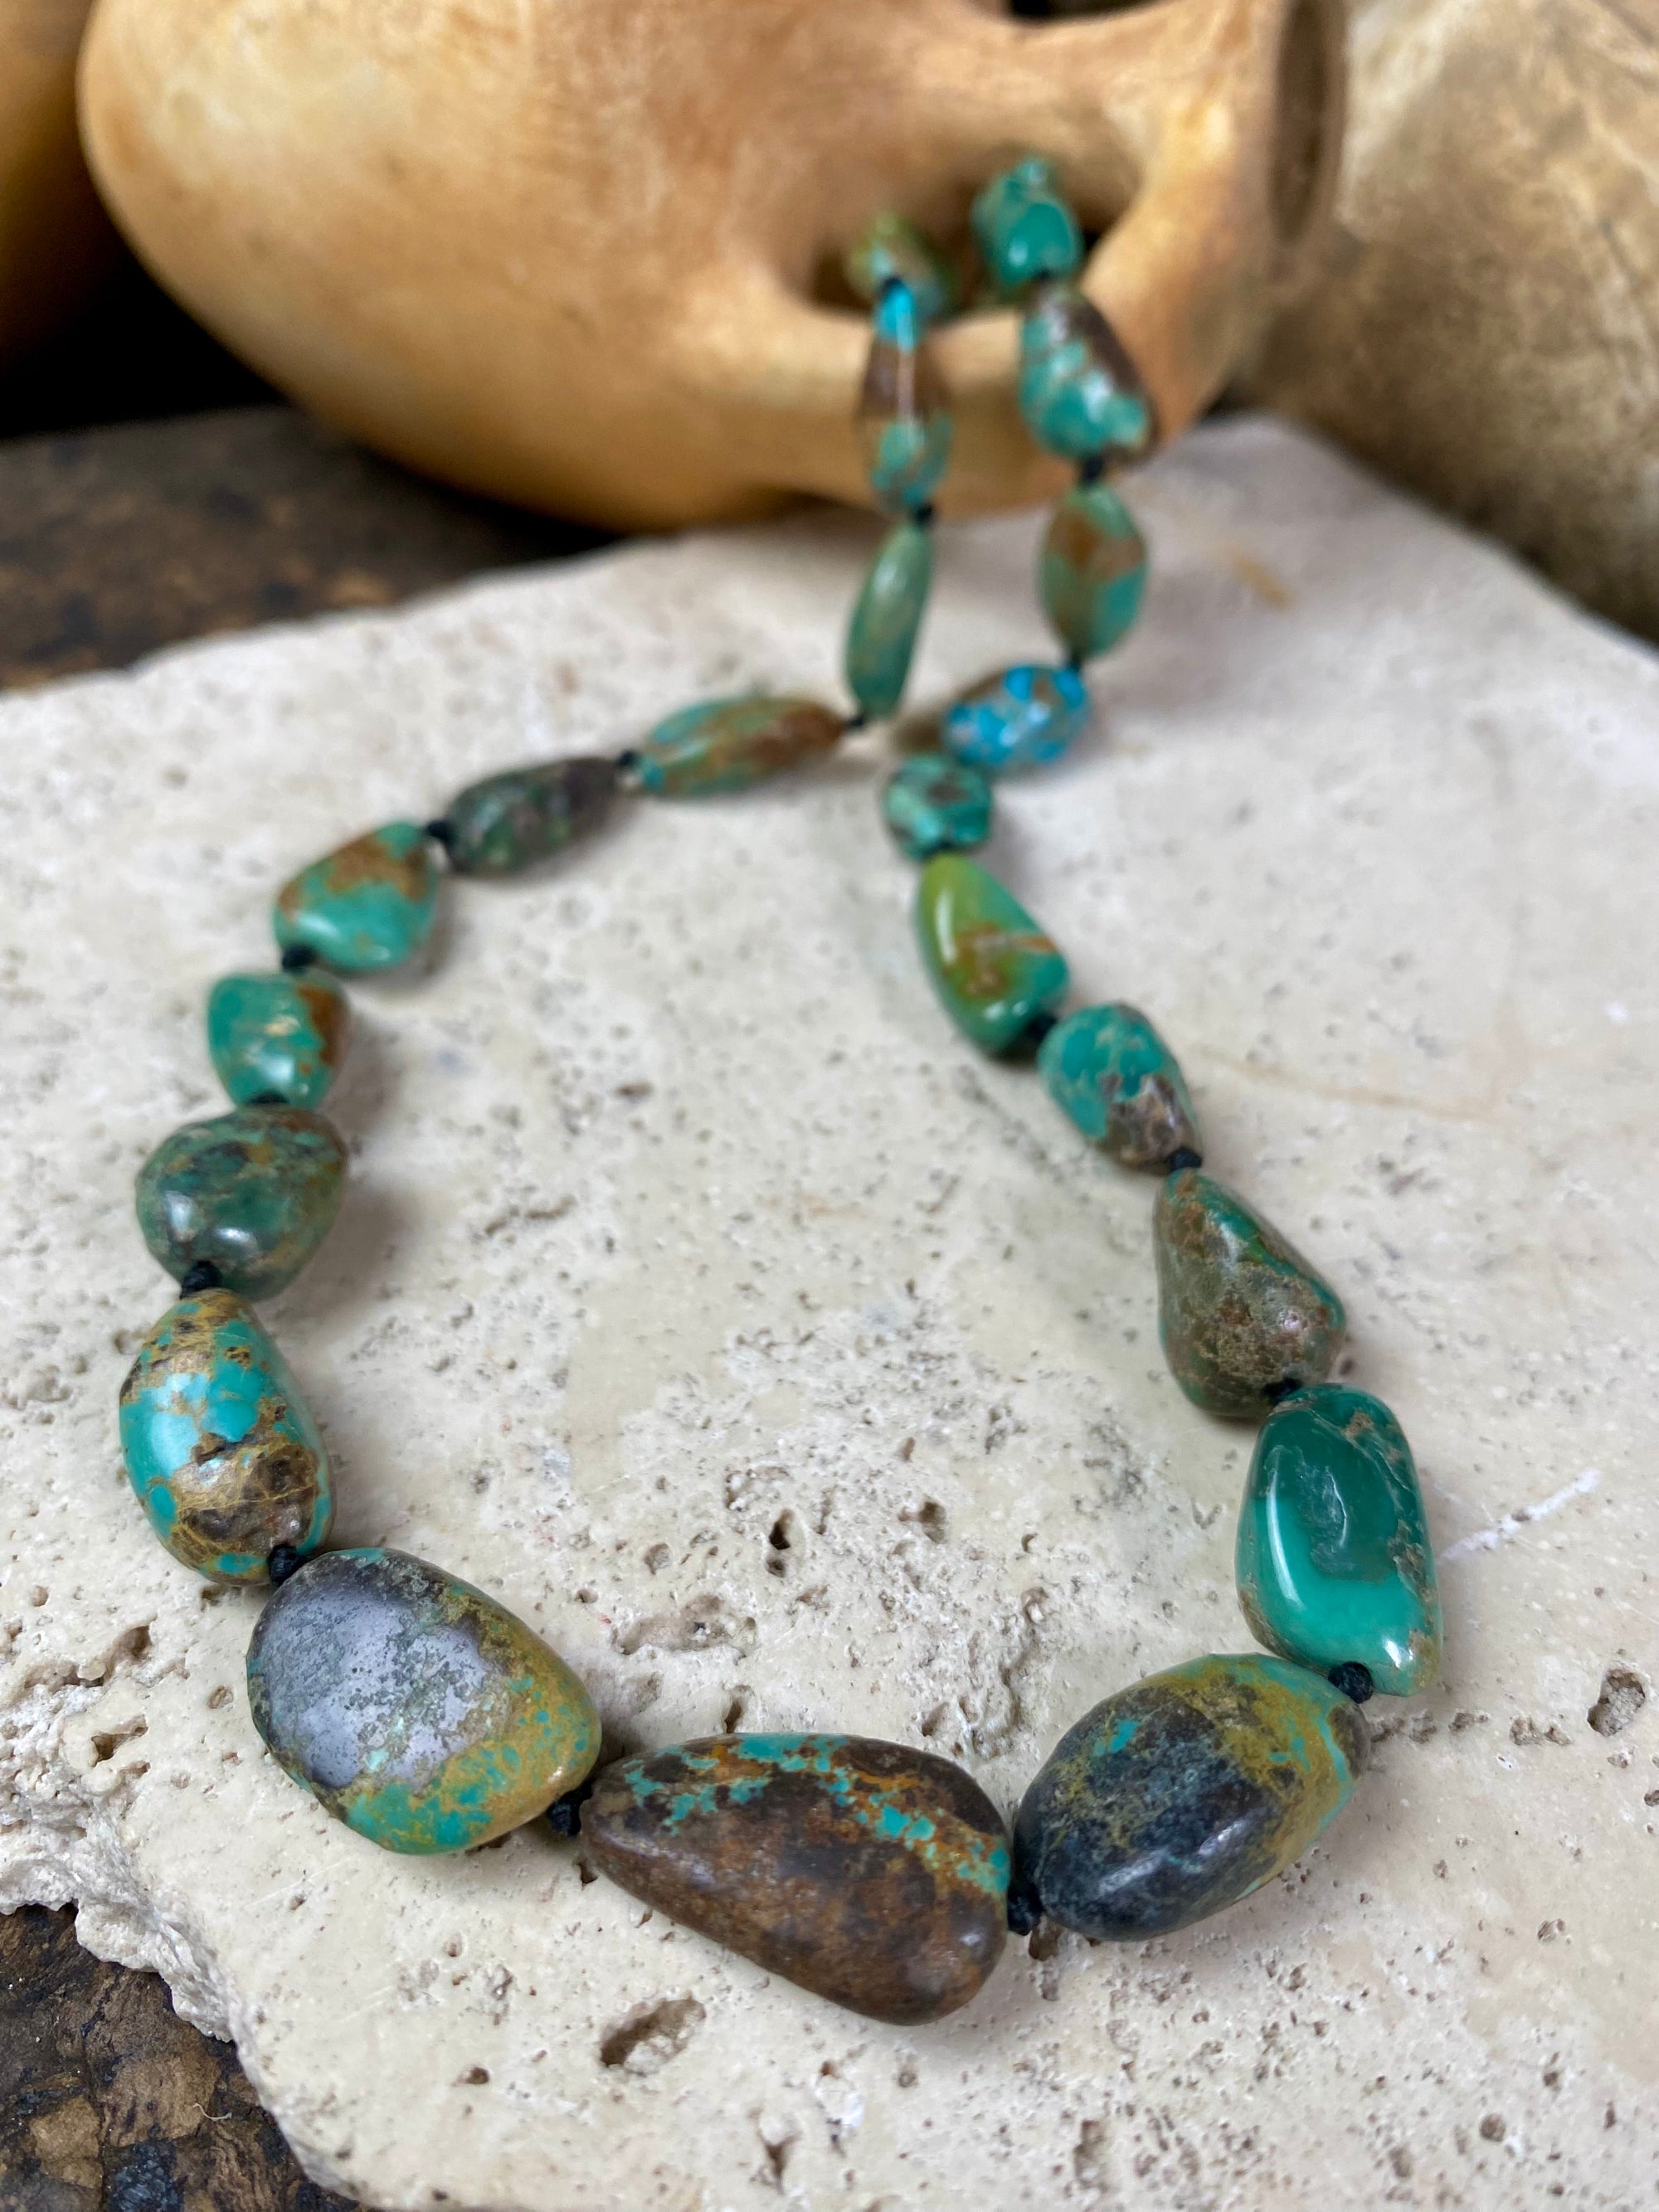 Tibetan turquoise necklace. Knotted between each bead and finished with sterling silver clasp. length 46.5 cm